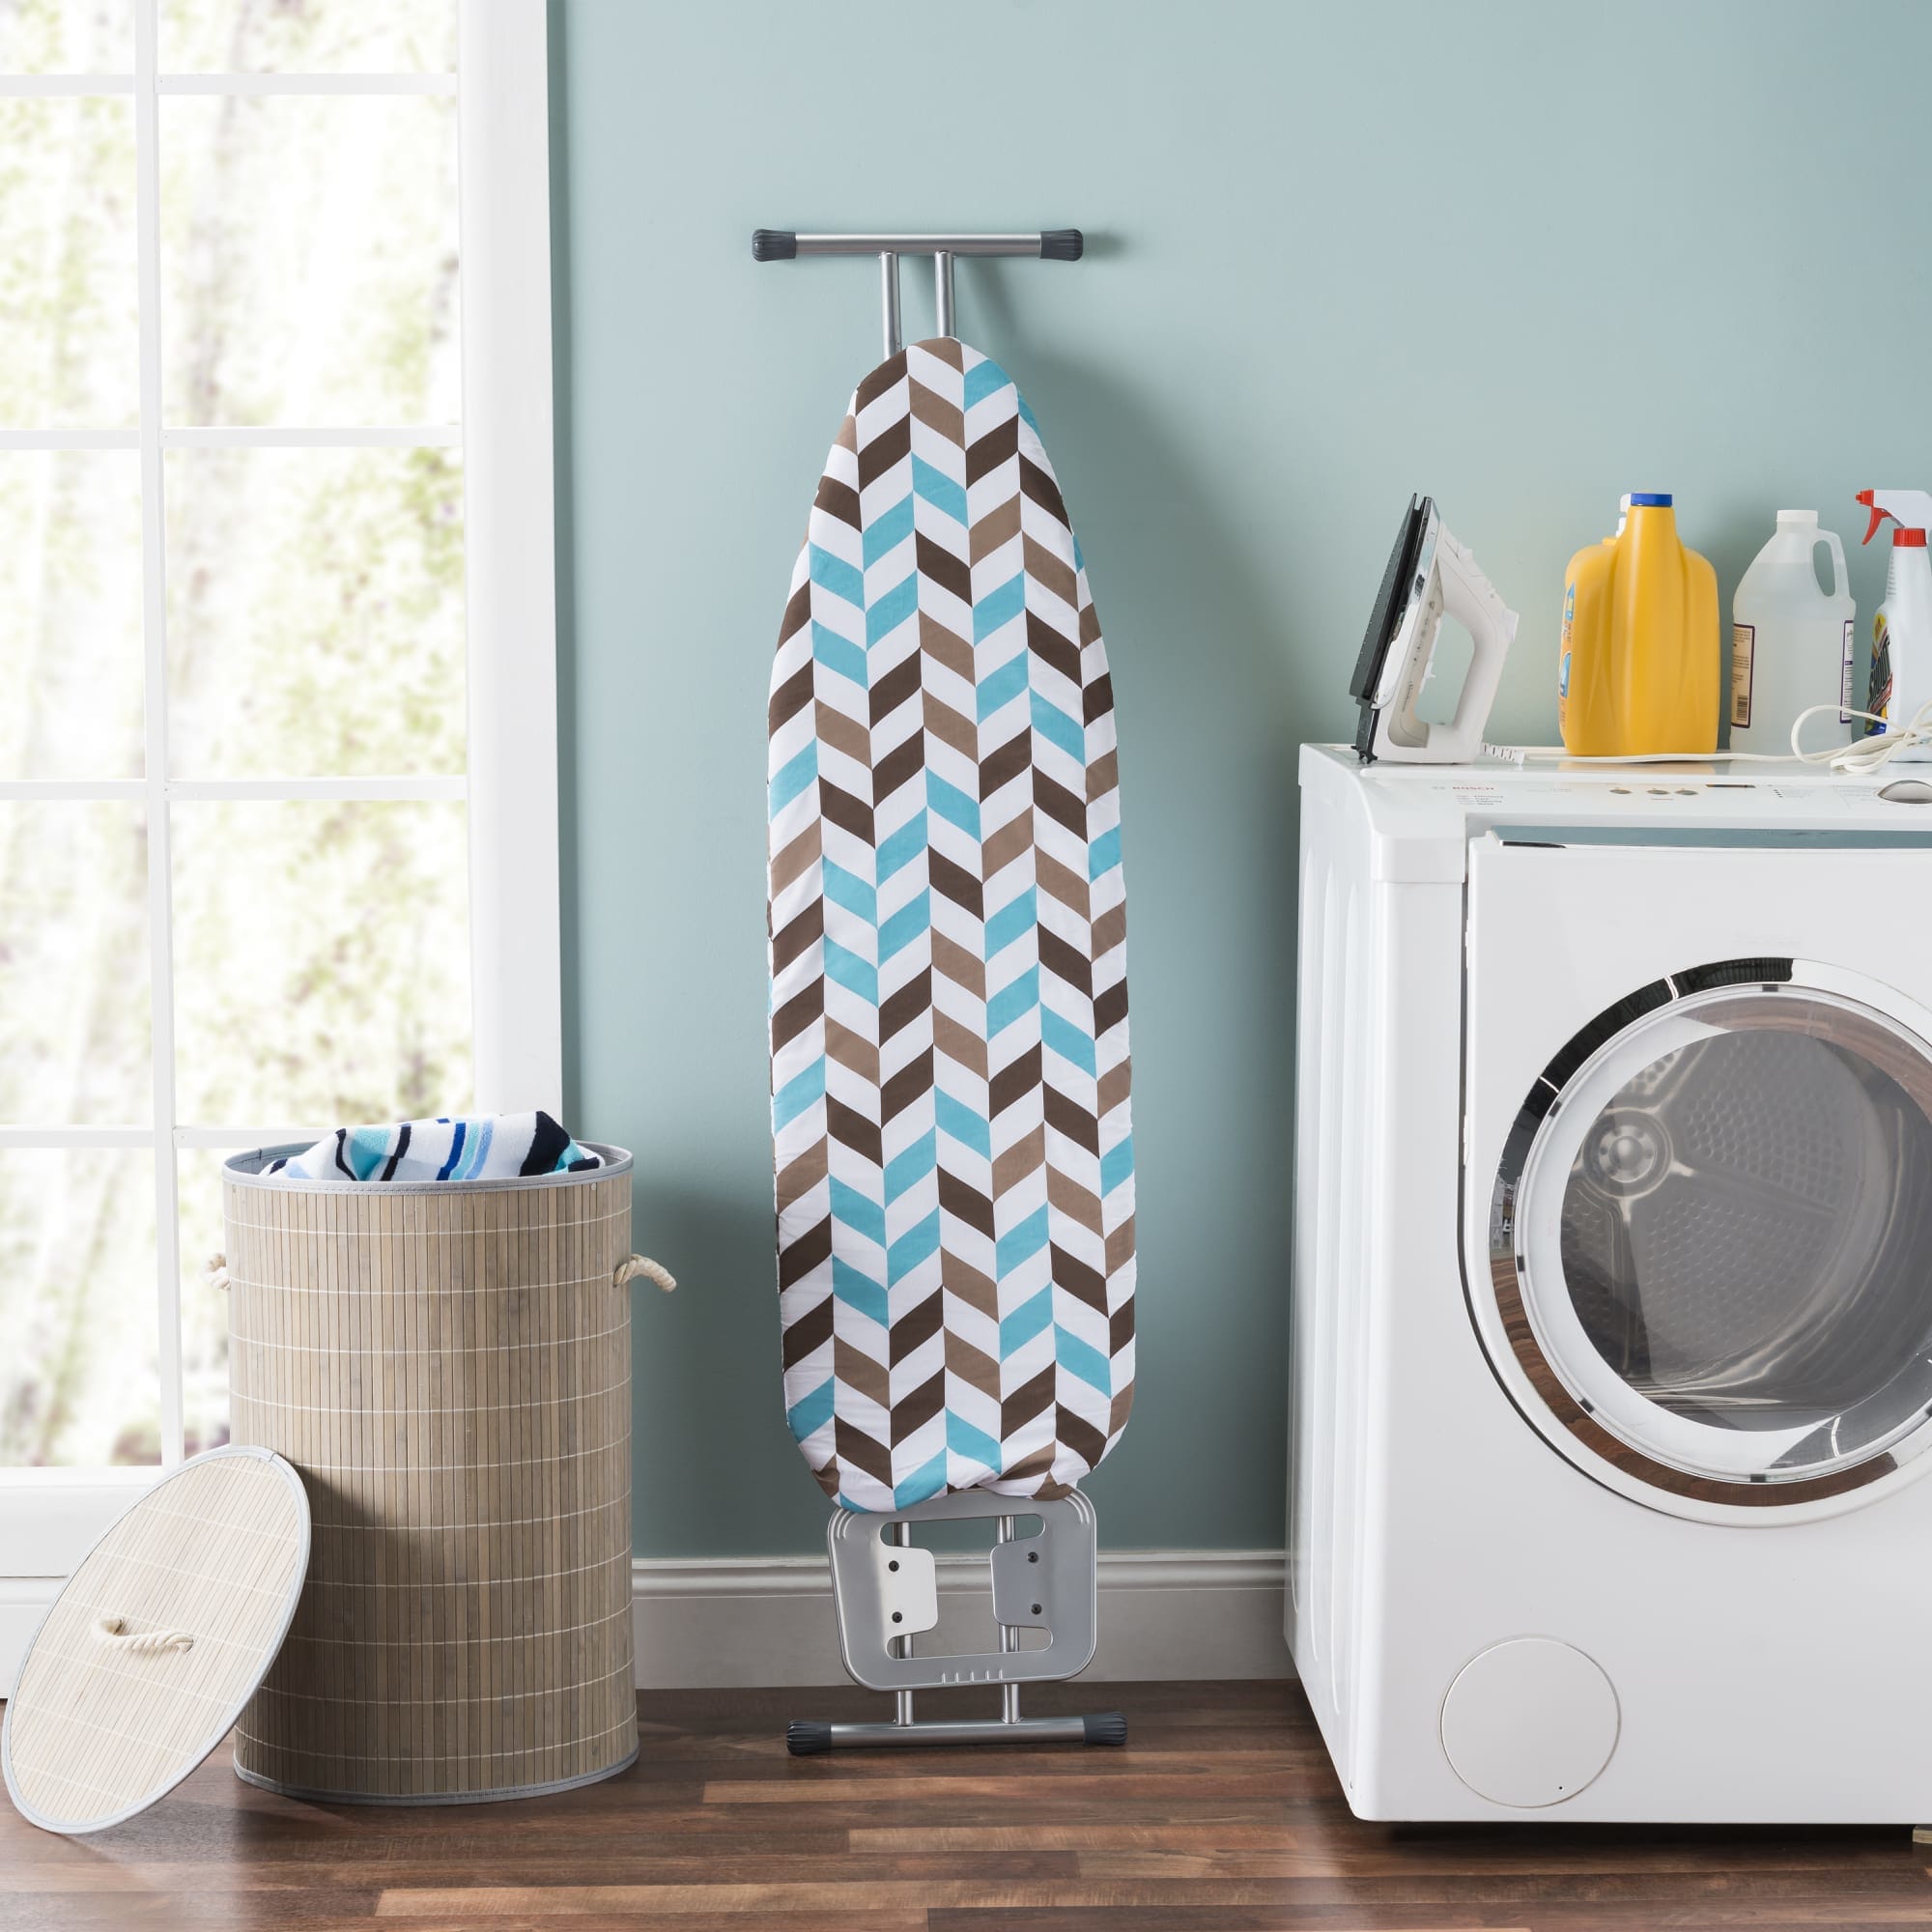 Home Basics Chevron Cotton Ironing Board Cover, Multi-Color $8.00 EACH, CASE PACK OF 12